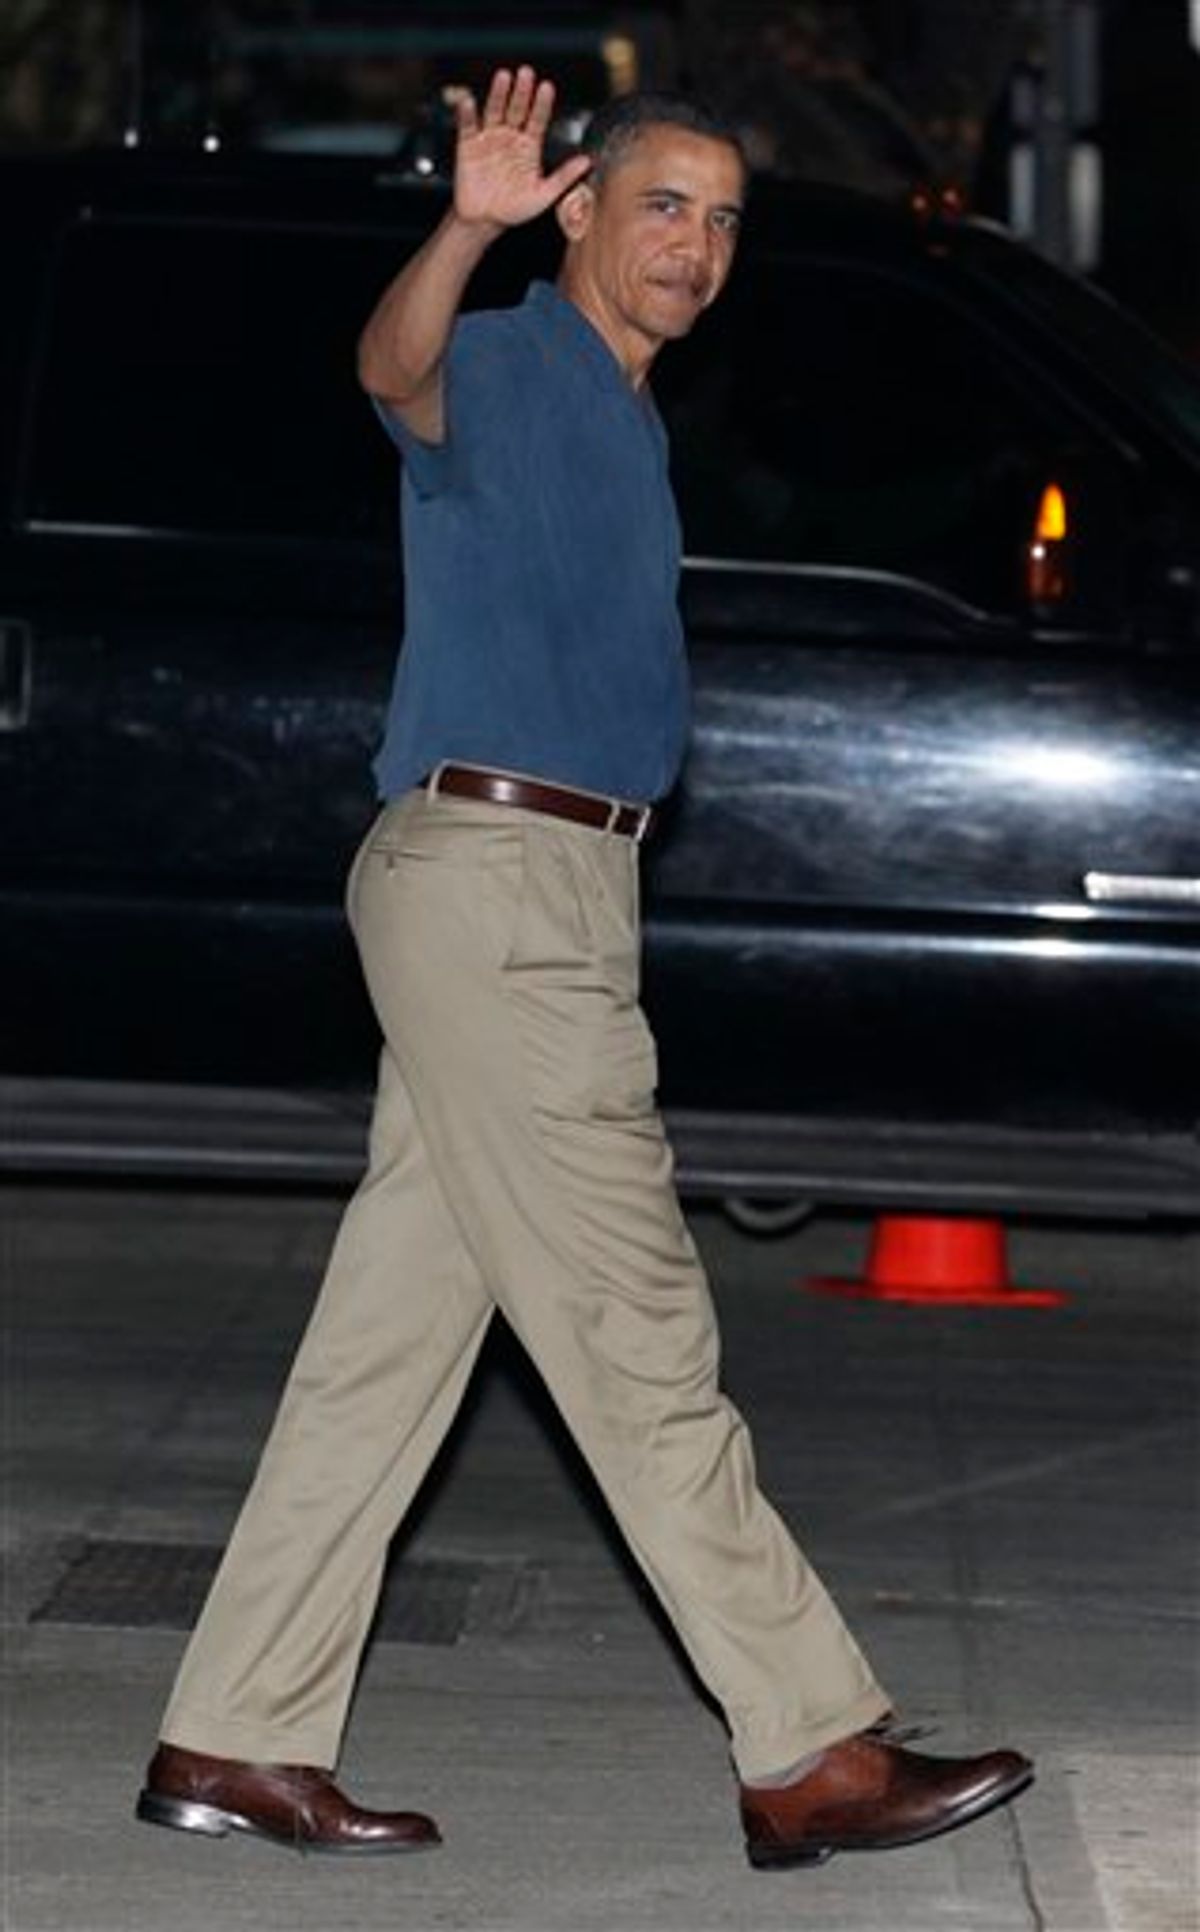 President Barack Obama waves as he leaves Alan Wong's Restaurant in Honolulu, Hawaii, Wednesday, Dec. 29, 2010, after dining with family and friends.. (AP Photo/Carolyn Kaster)  (AP)